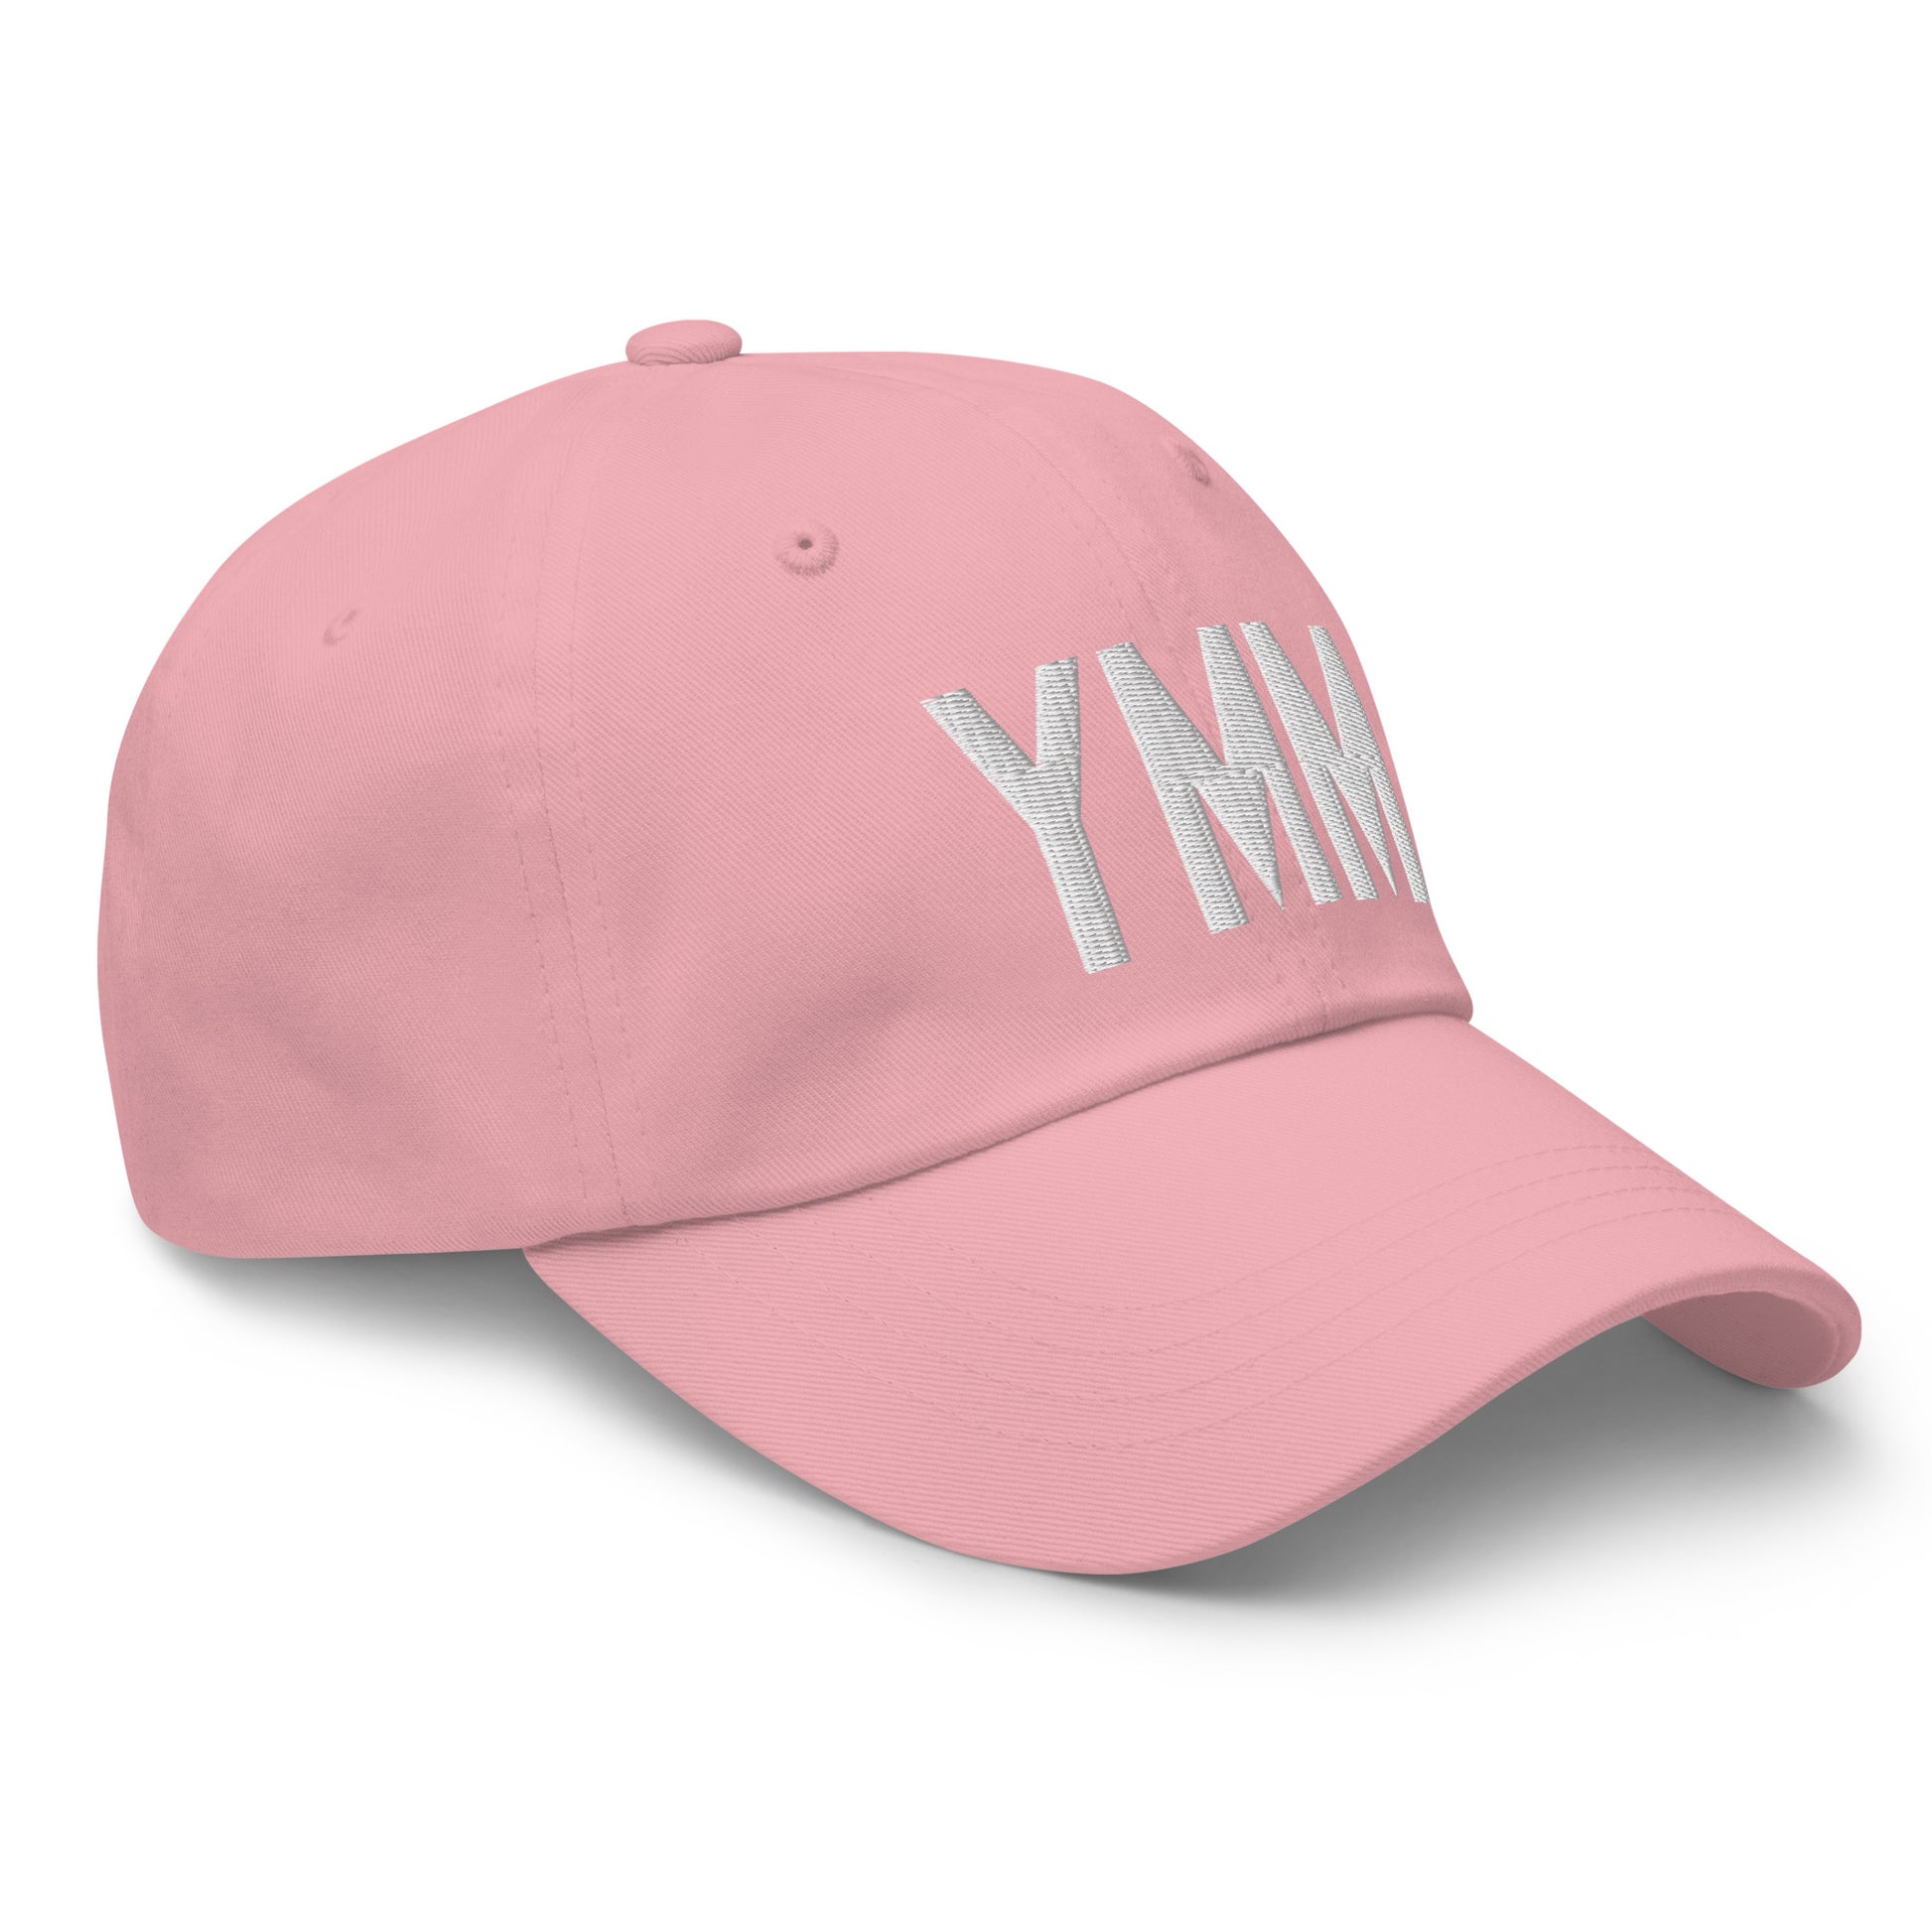 Airport Code Baseball Cap - White • YMM Fort McMurray • YHM Designs - Image 26